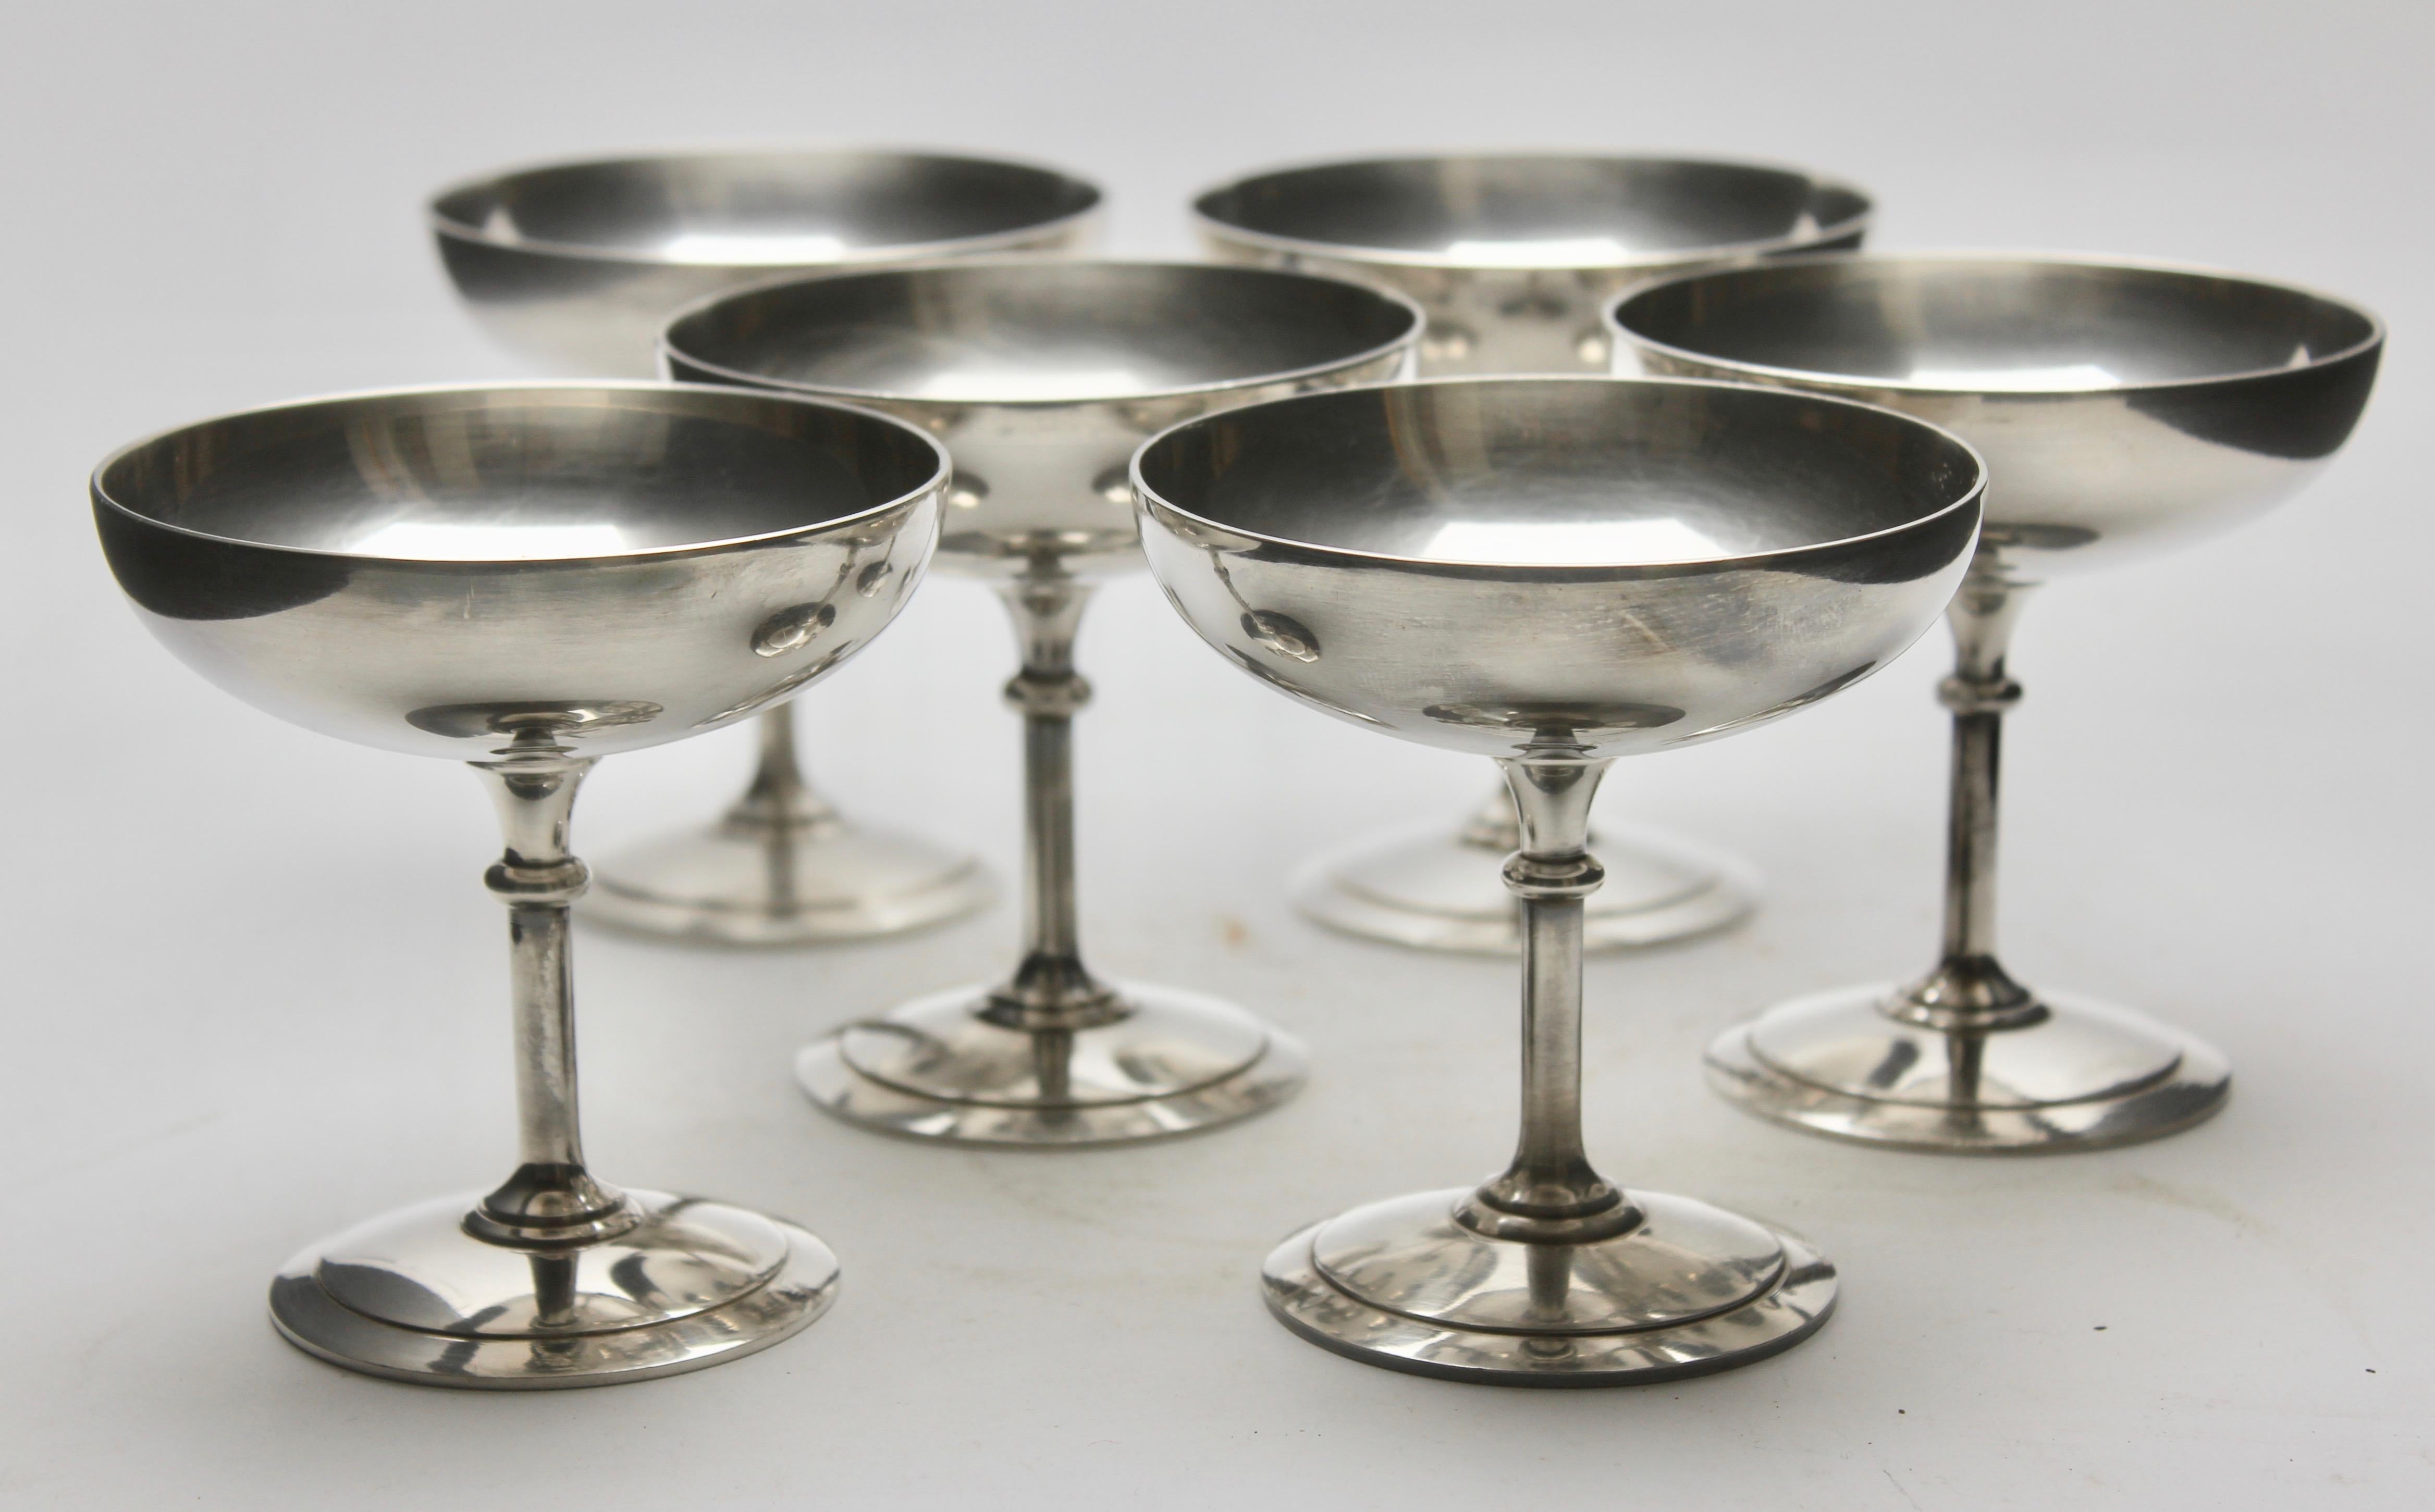 Molded Christofle Set of 6 Silver Plated Ice Cream Bowl